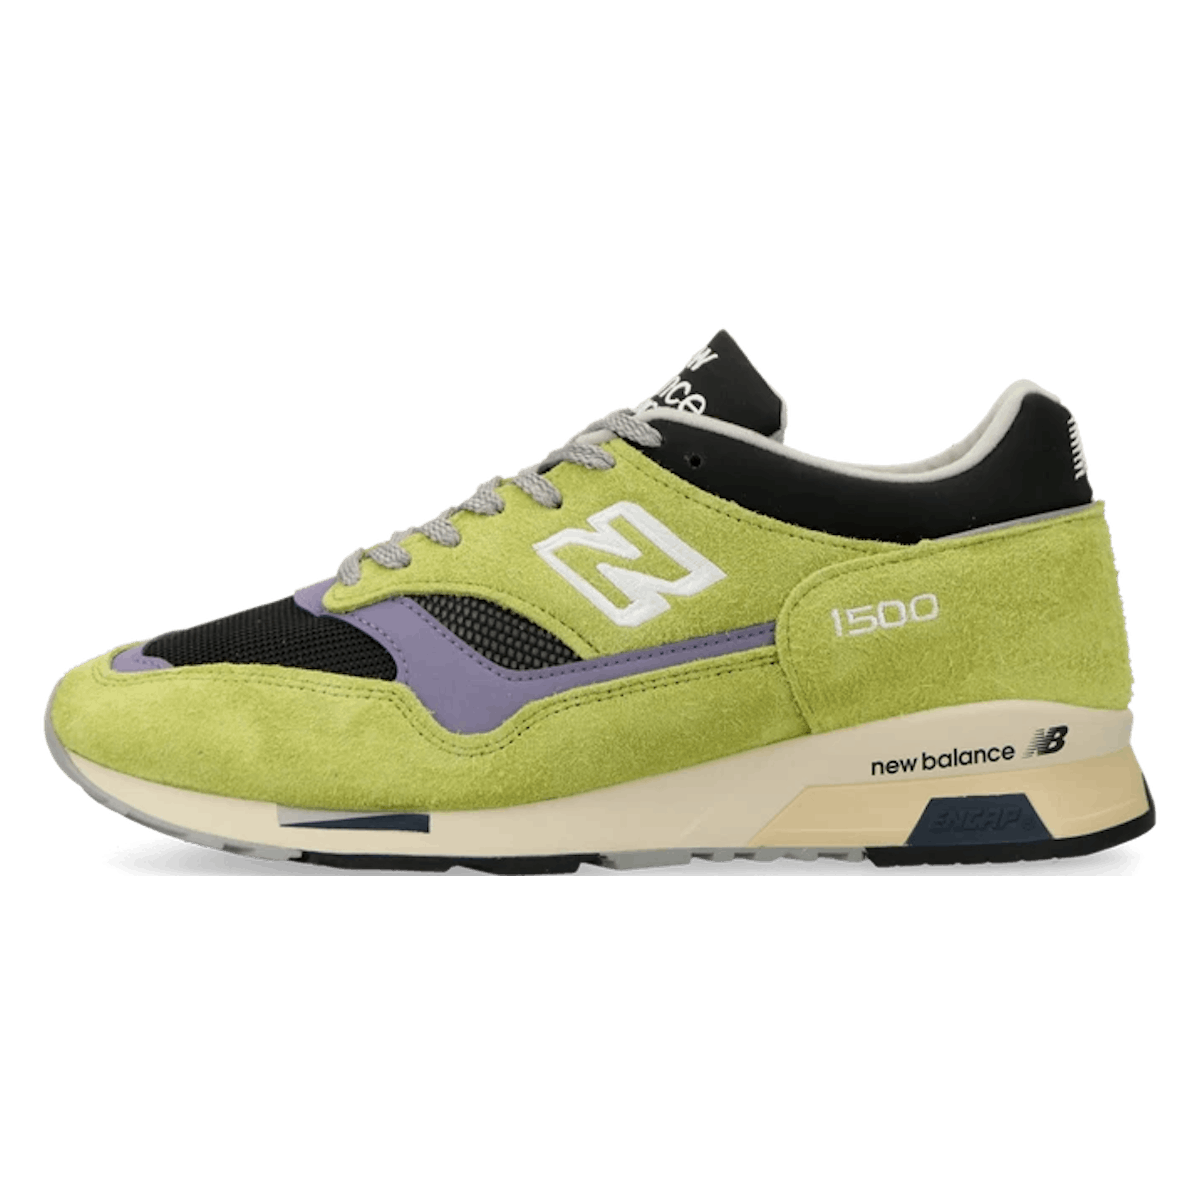 New Balance 1500 Made in UK "Green Oasis"